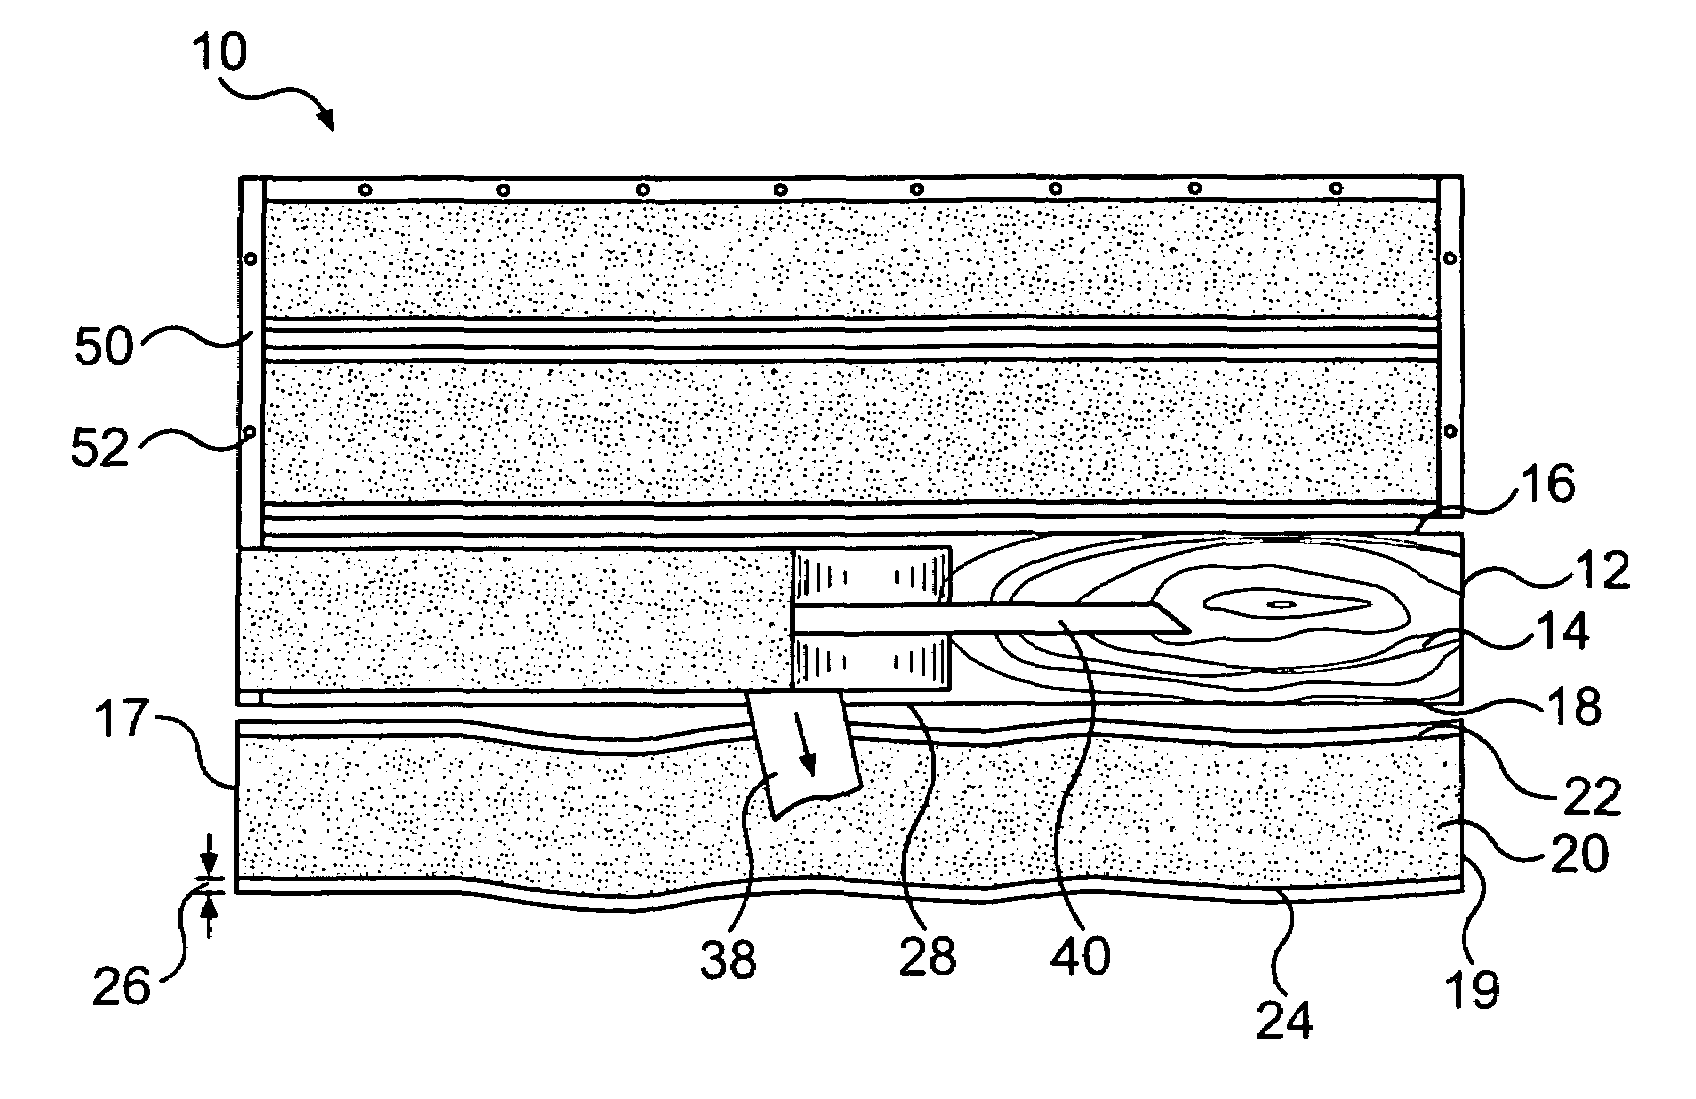 Method of applying a covering for boards